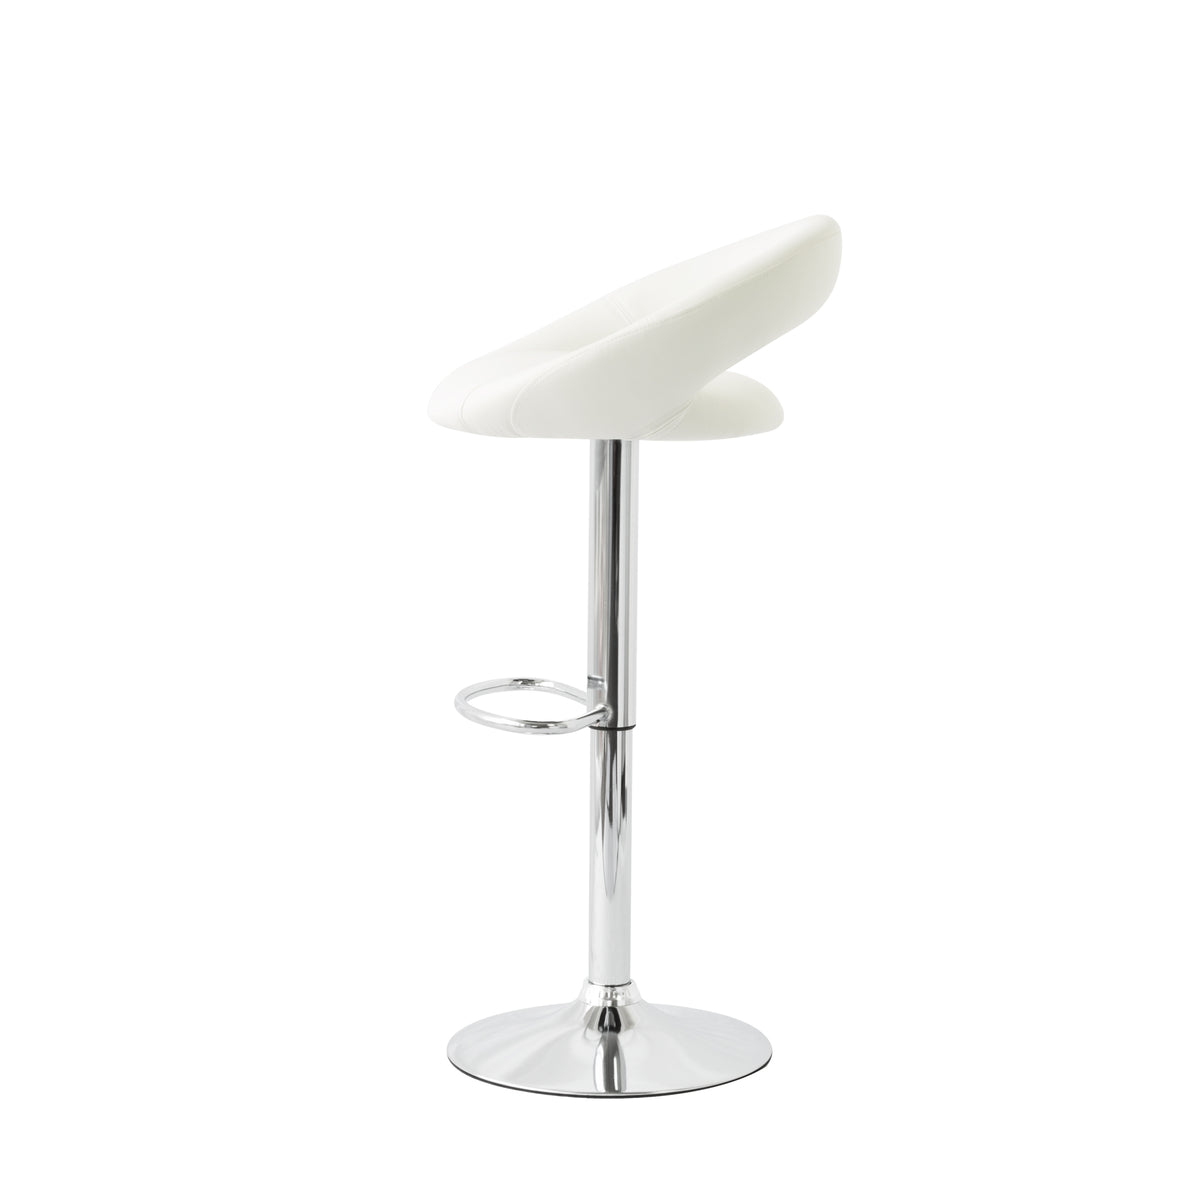 2 Curve Leather Barstools (White) w/ Adjustable Height, 78-99cm